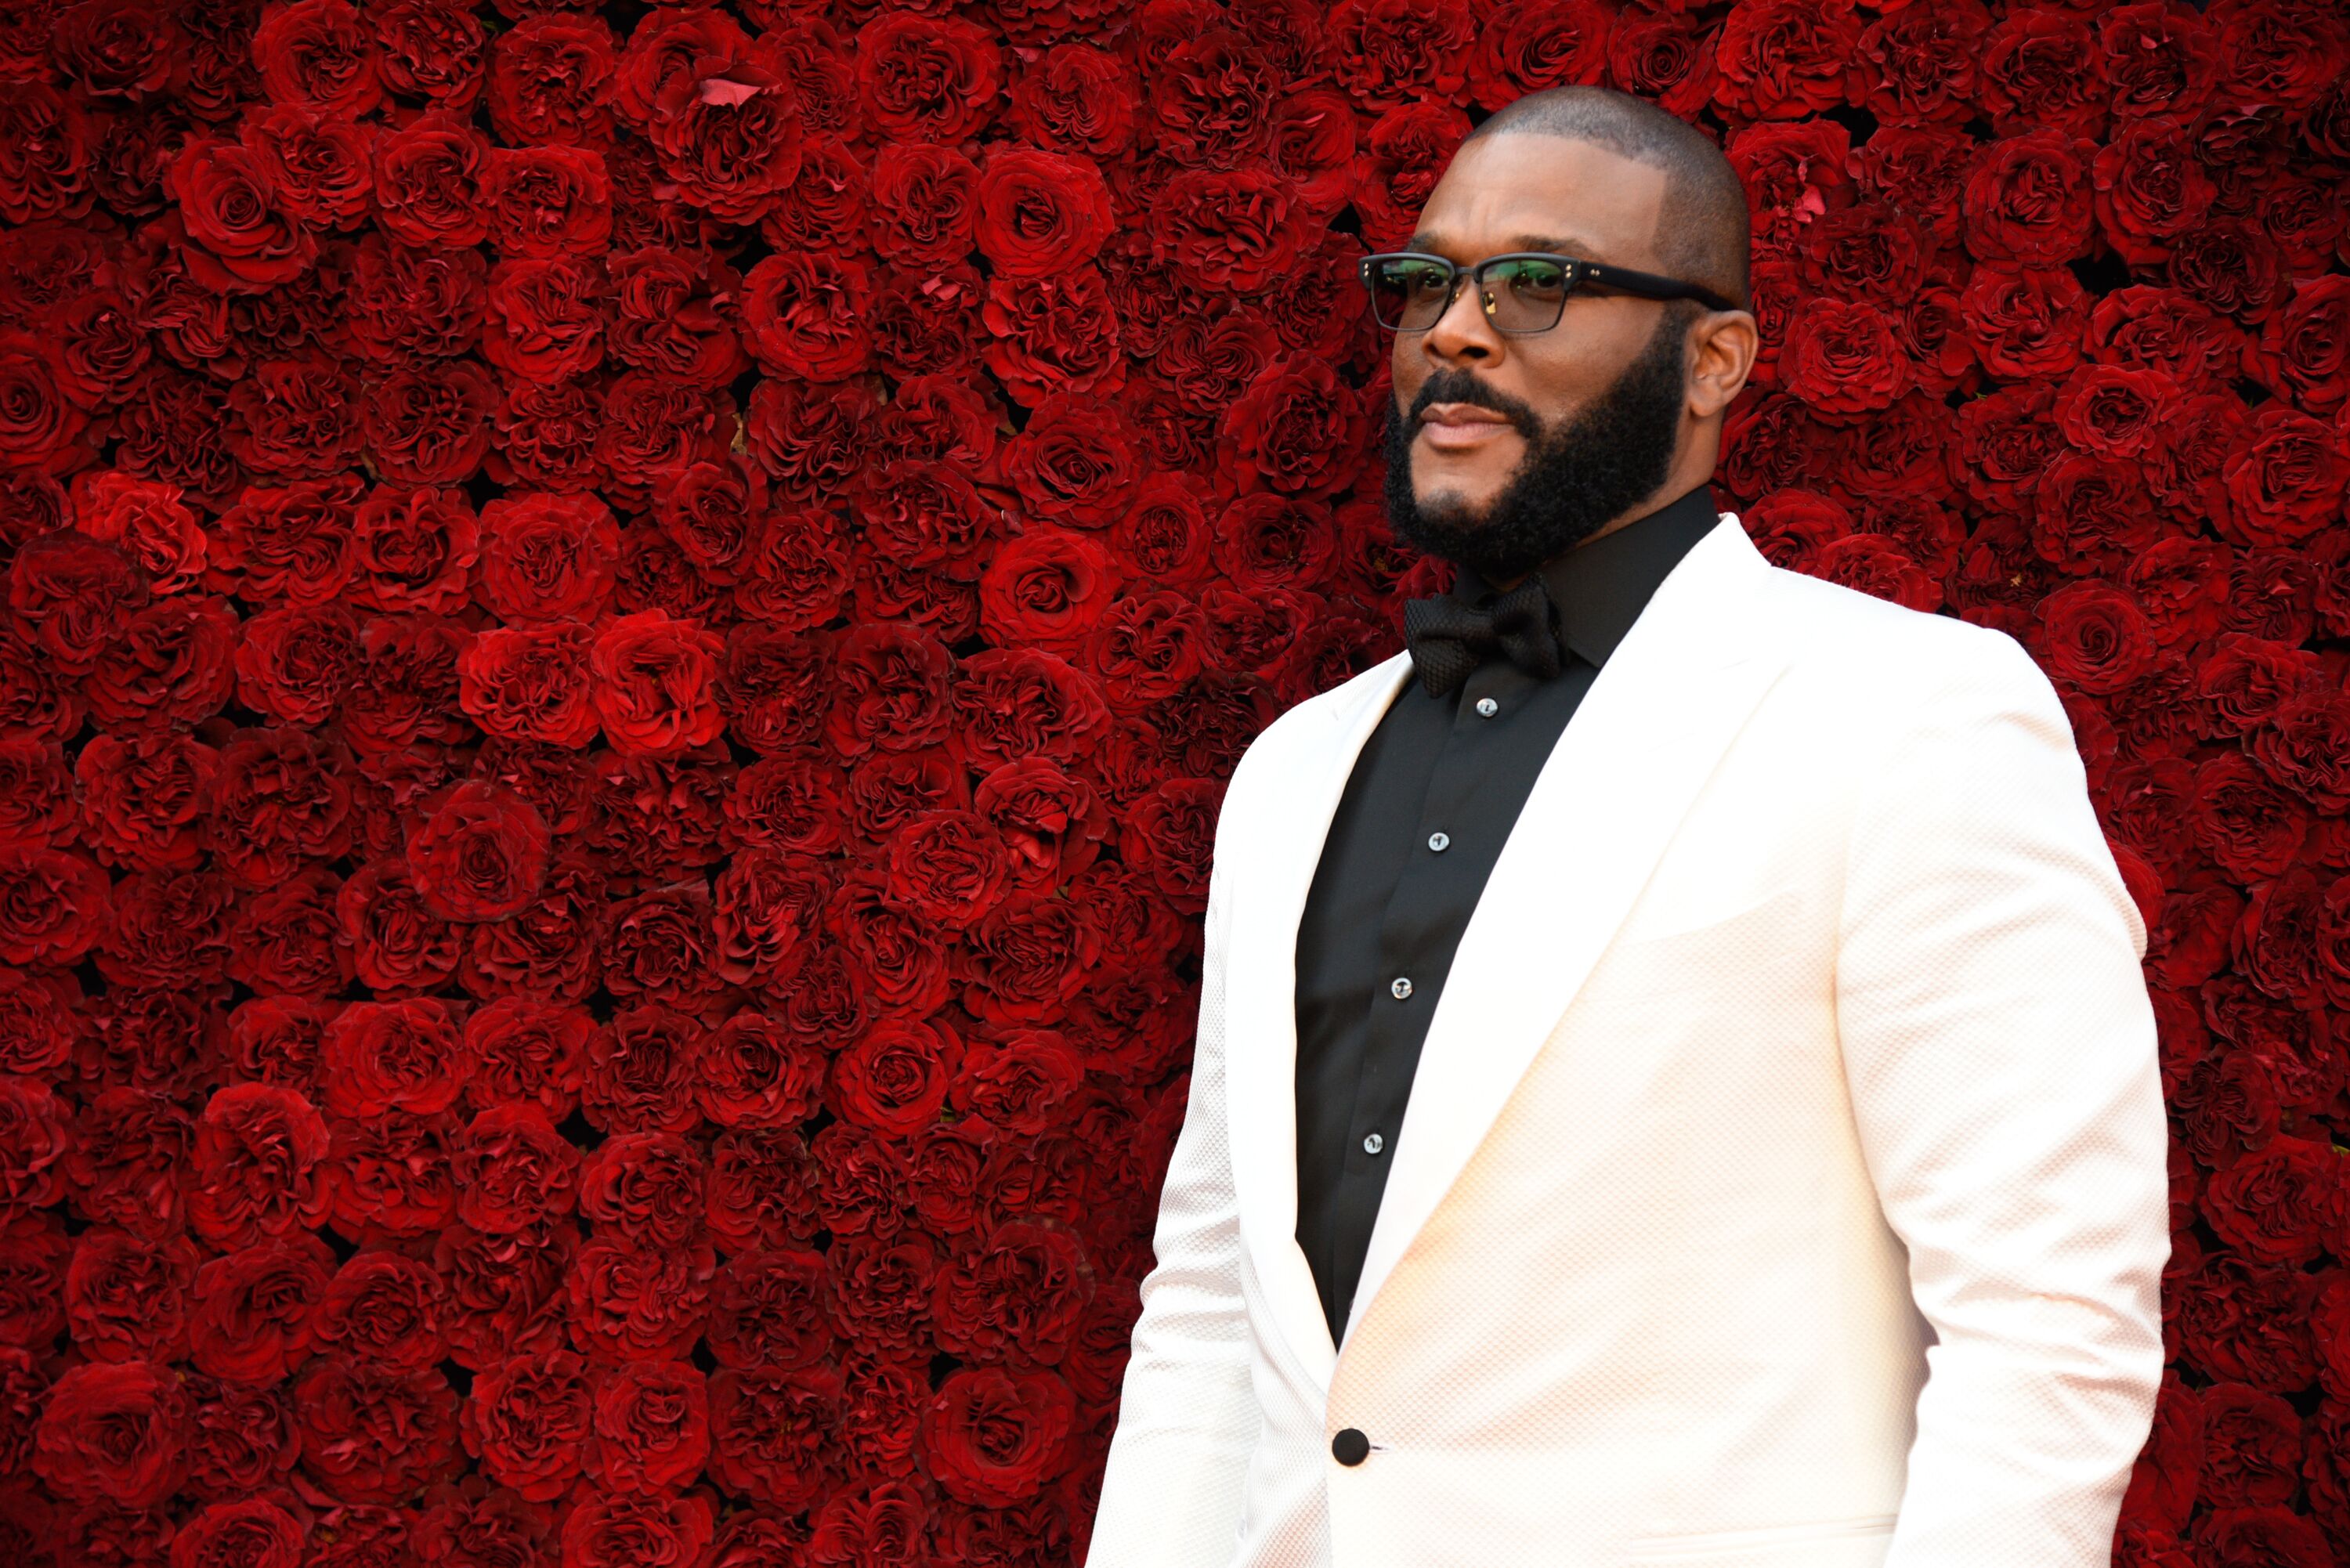 Tyler Perry at the Gala opening of his Tyler Perry Studios in Georgia in October 2019/ Source: Getty Images